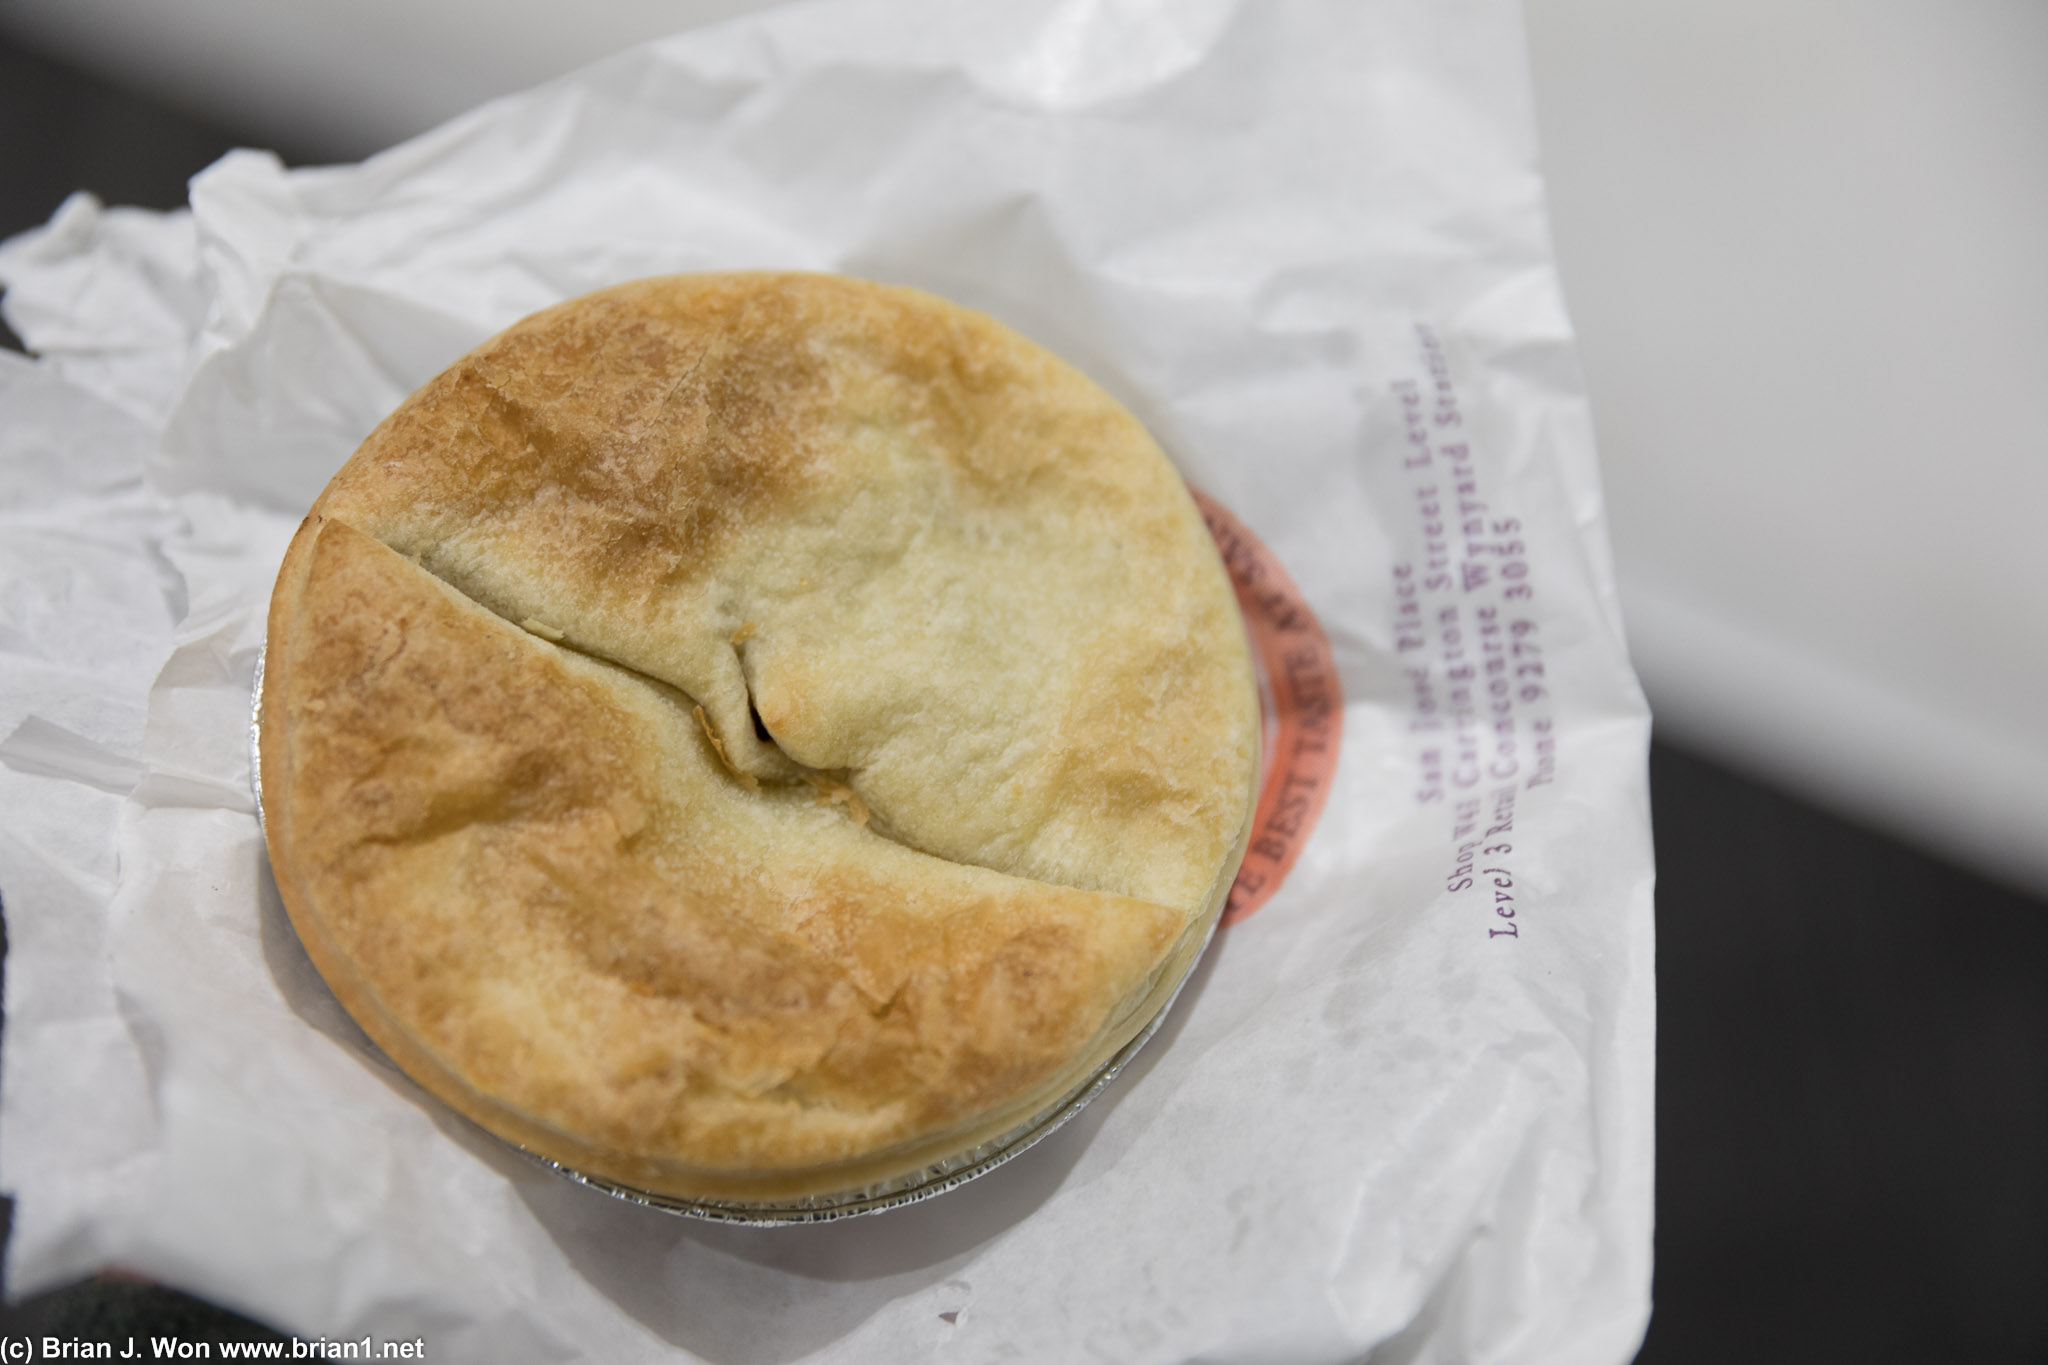 So-so meat pie from a shop at the train station.